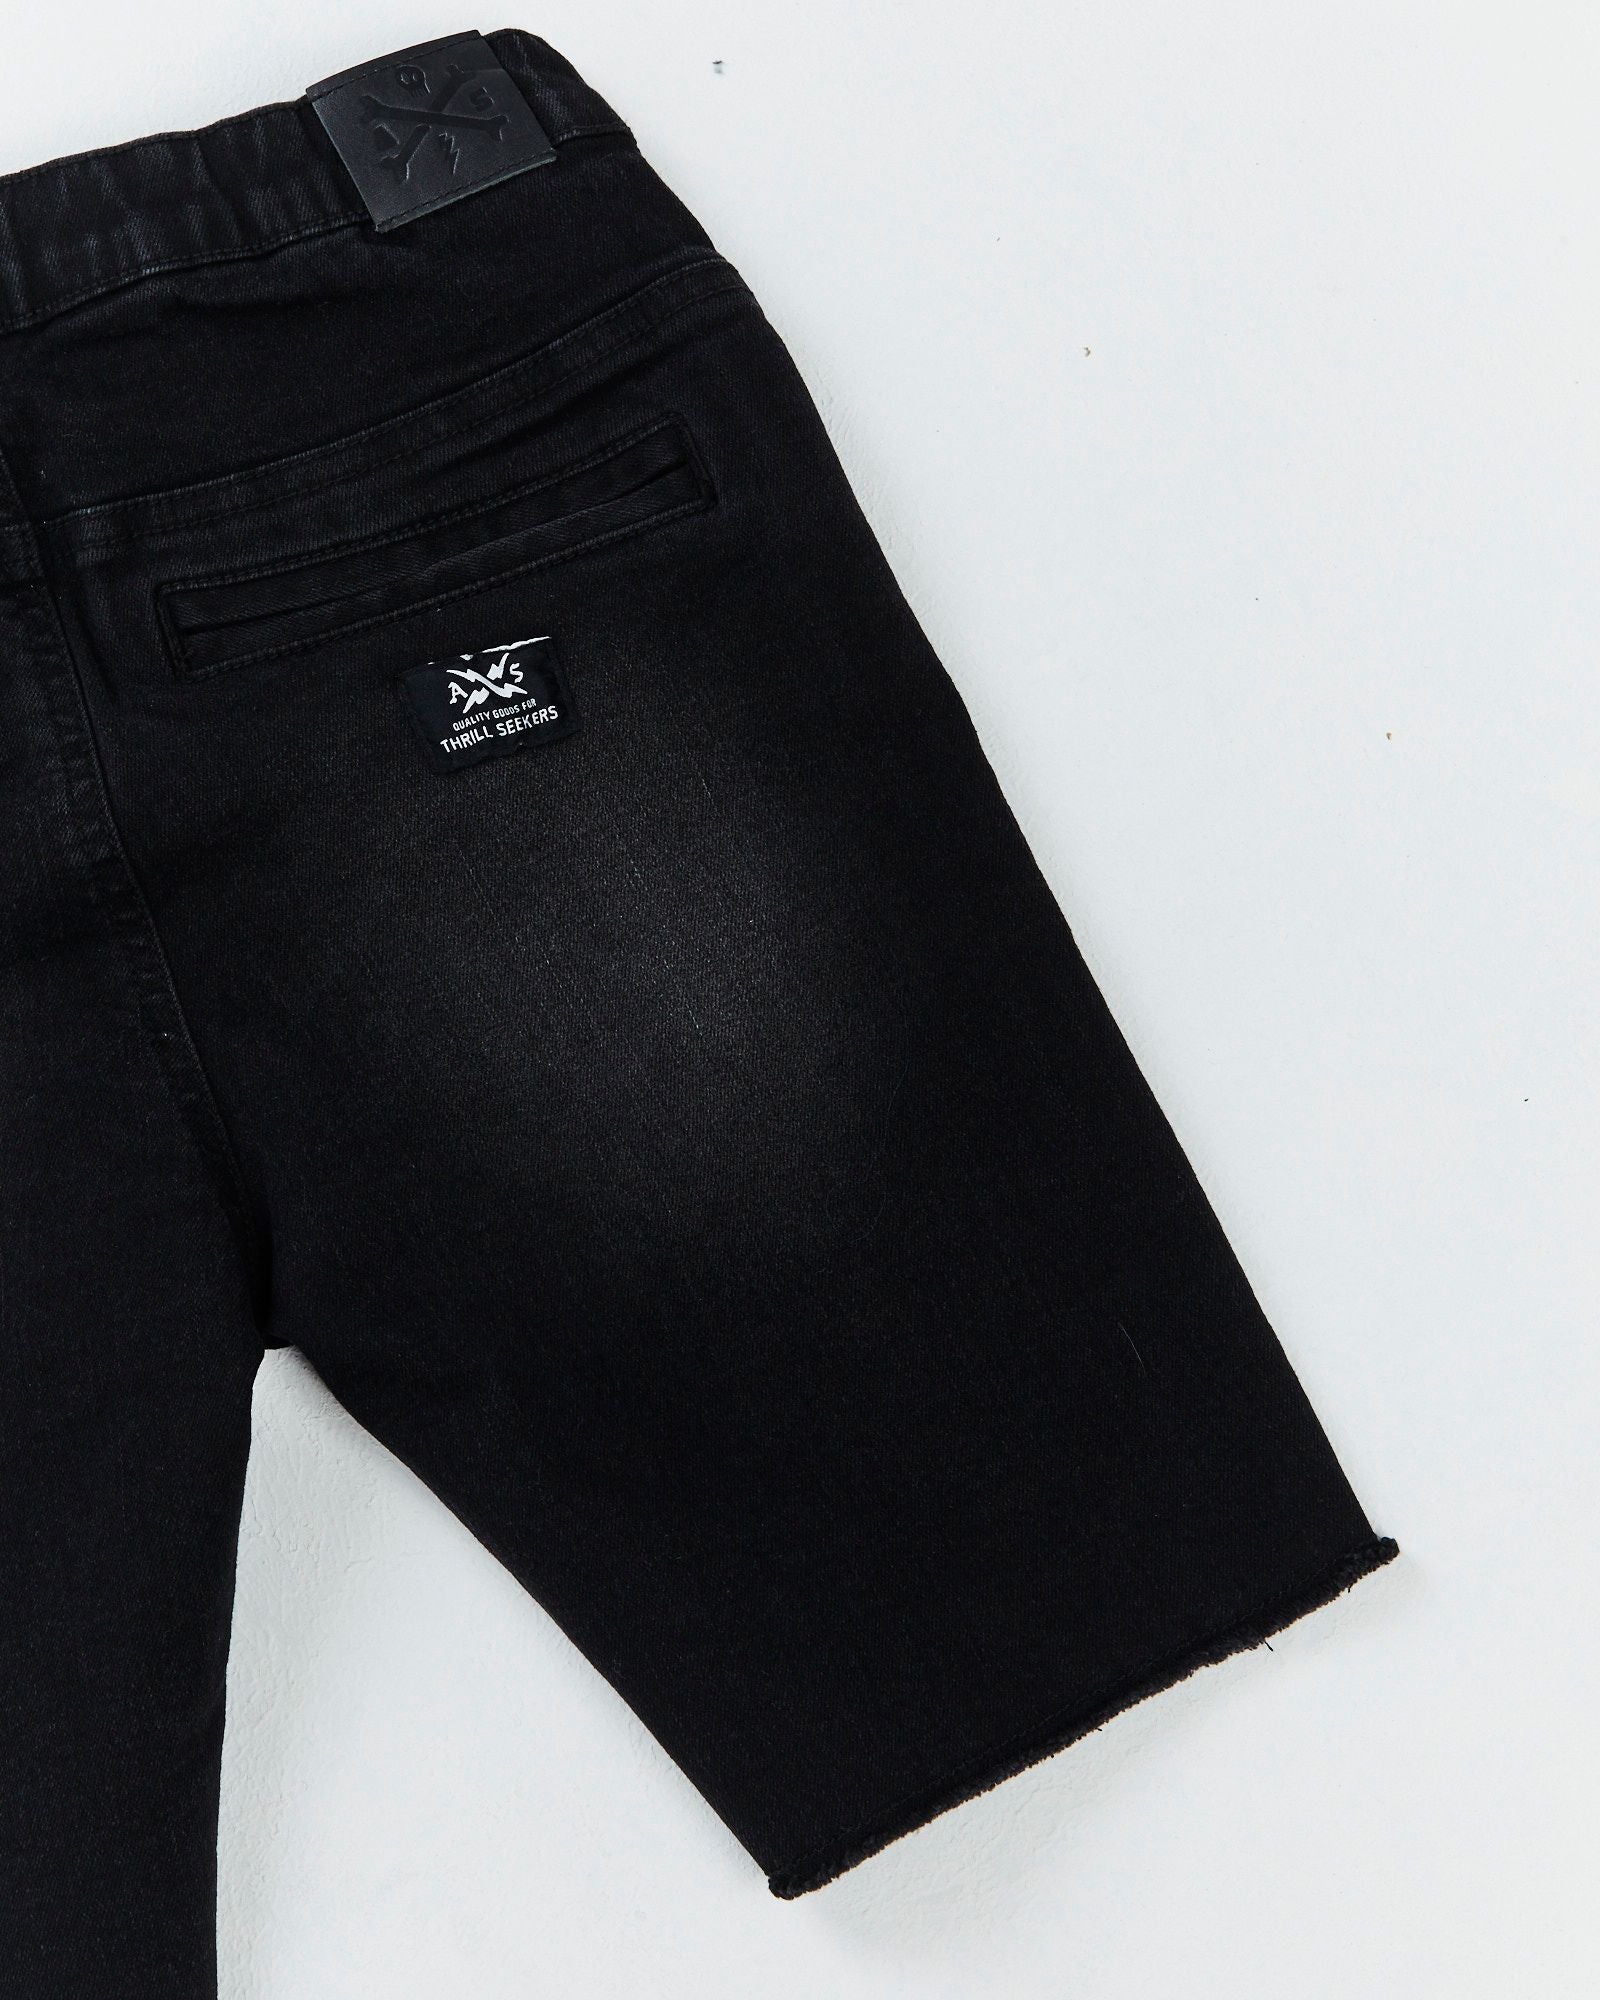 Alphabet Soup's Teen Reckless Denim Jogg Jean Shorts for boys aged 8-16. Crafted from stretch knit denim and vintage black, perfect for any marathon of adventure. Relaxed fit, elasticated waist, five pocket design.